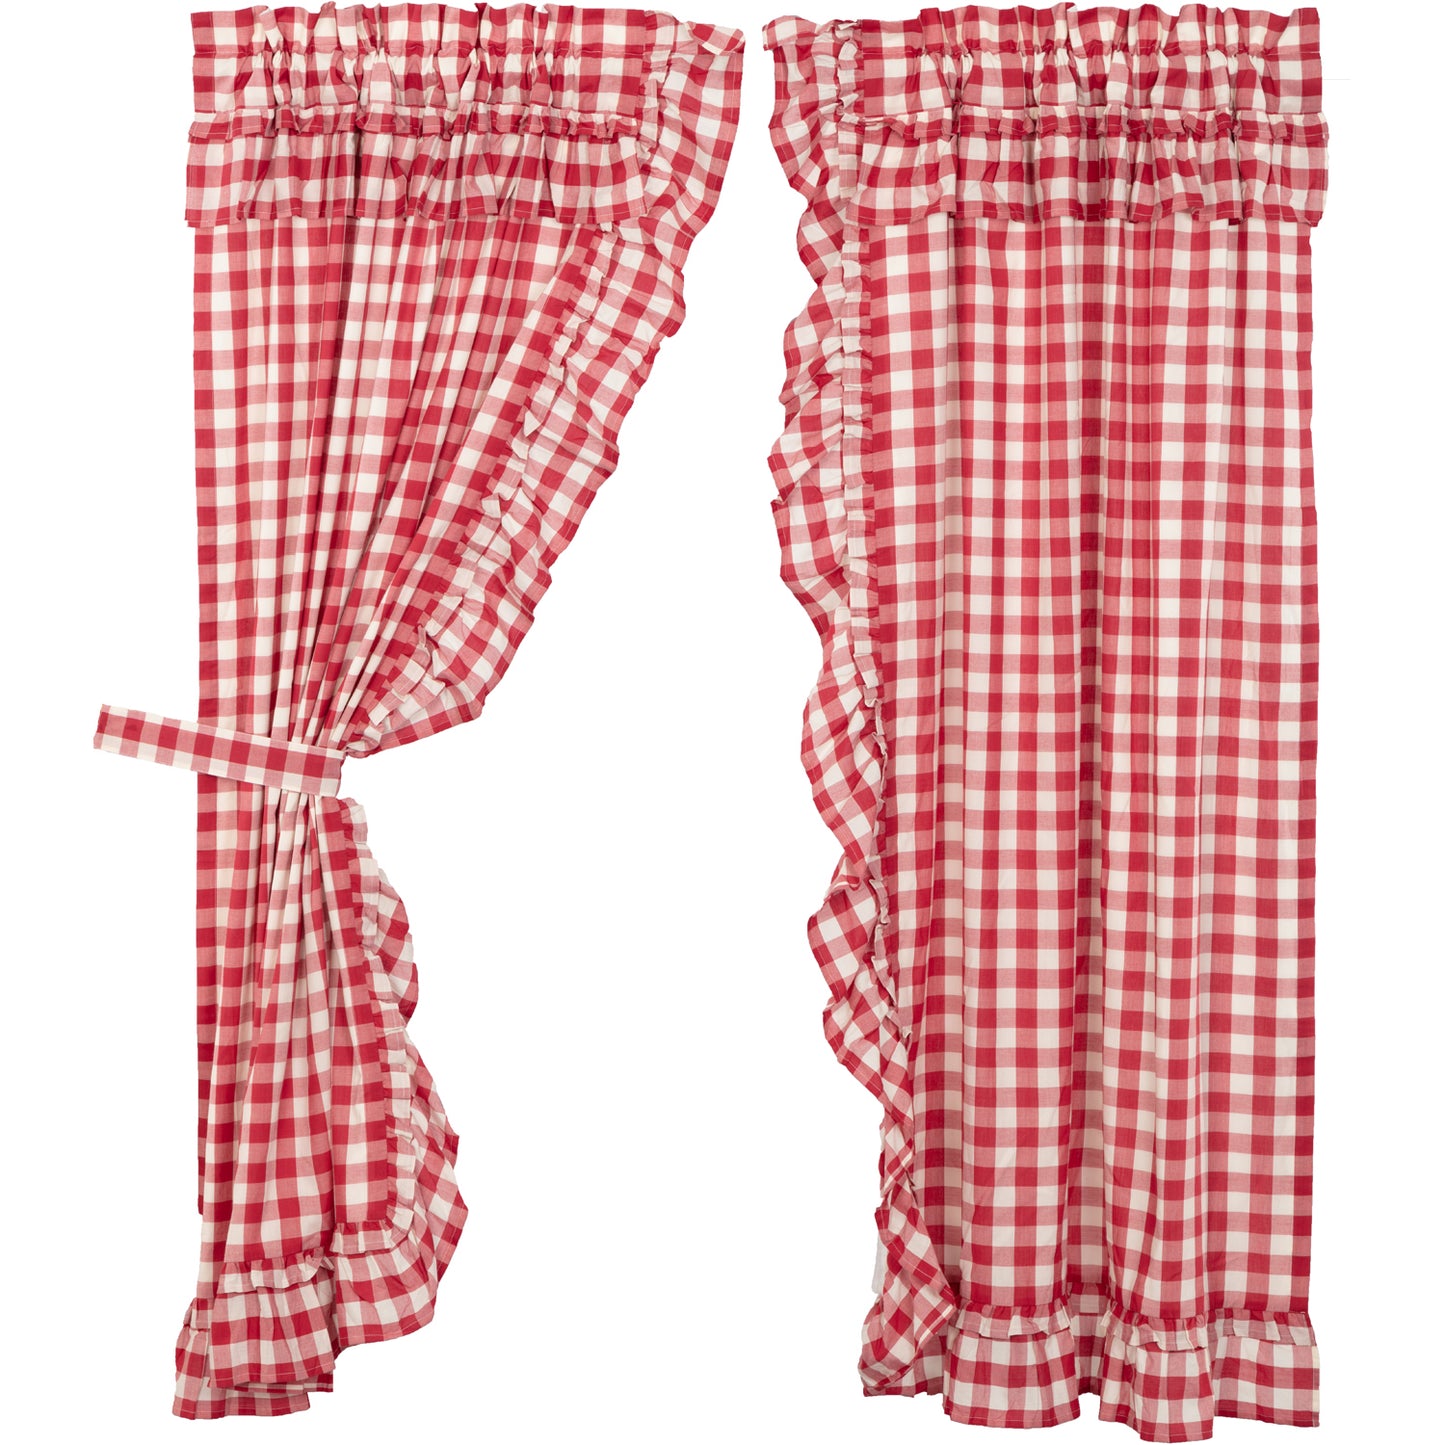 51118-Annie-Buffalo-Red-Check-Ruffled-Short-Panel-Set-of-2-63x36-image-6